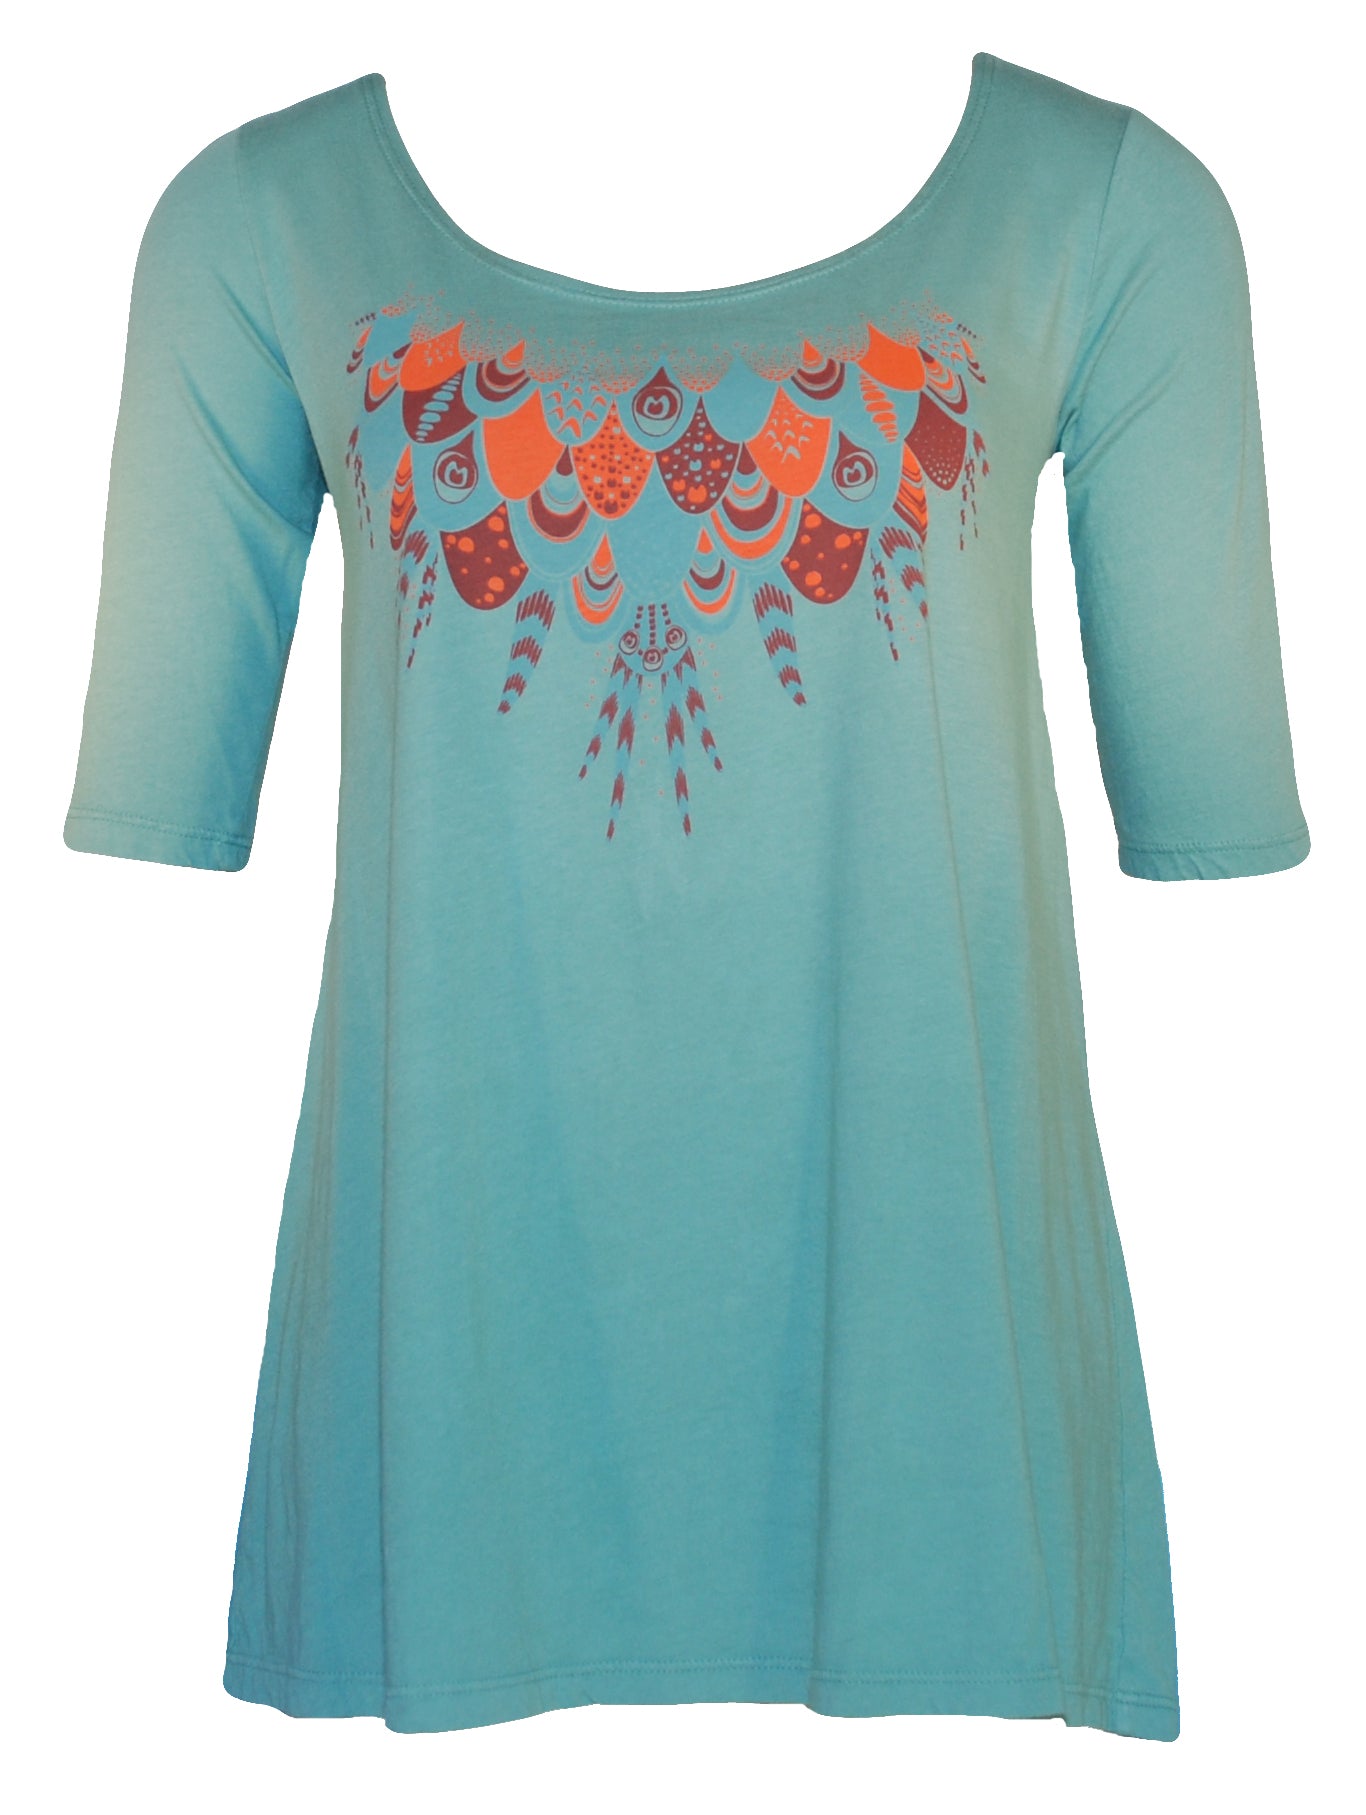 Light blue orange and brown feather print swing top